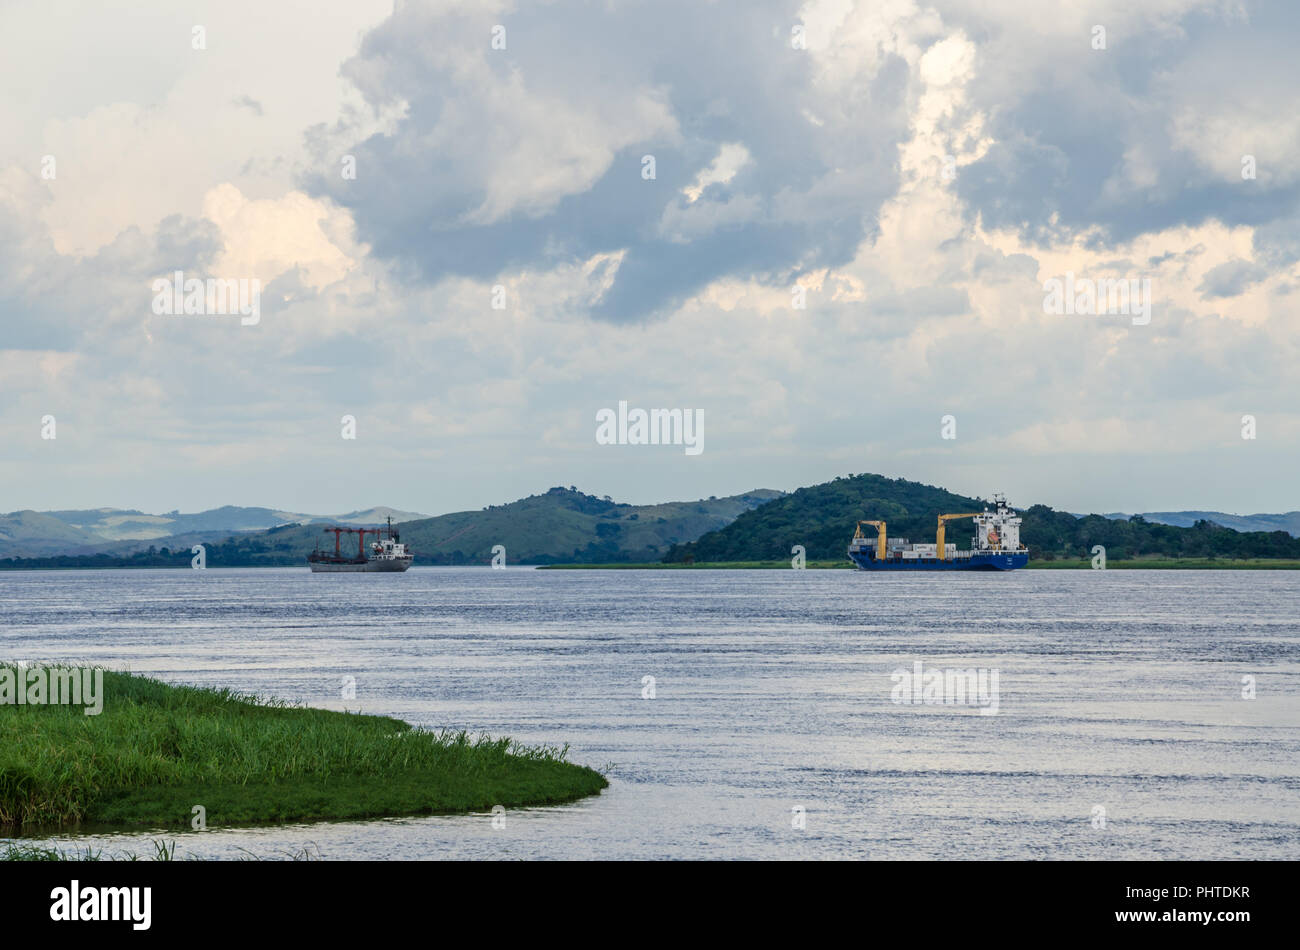 Container cargo ships on mighty Congo river with dramatic cloudy sky and lush green grass in foreground, Democratic Republic of Congo, Africa. Stock Photo